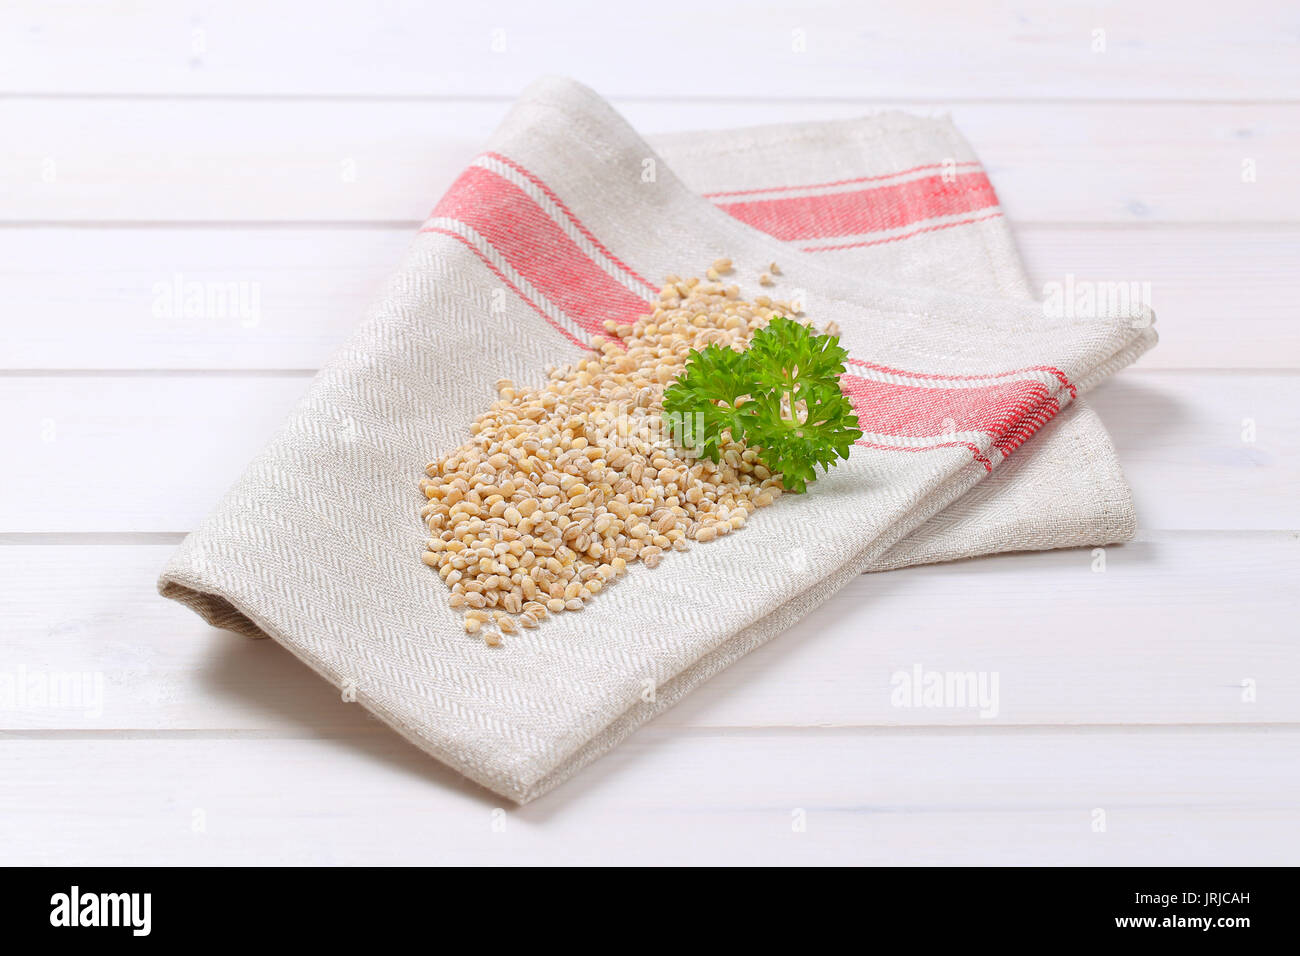 pile of pearl barley on folded place mat Stock Photo